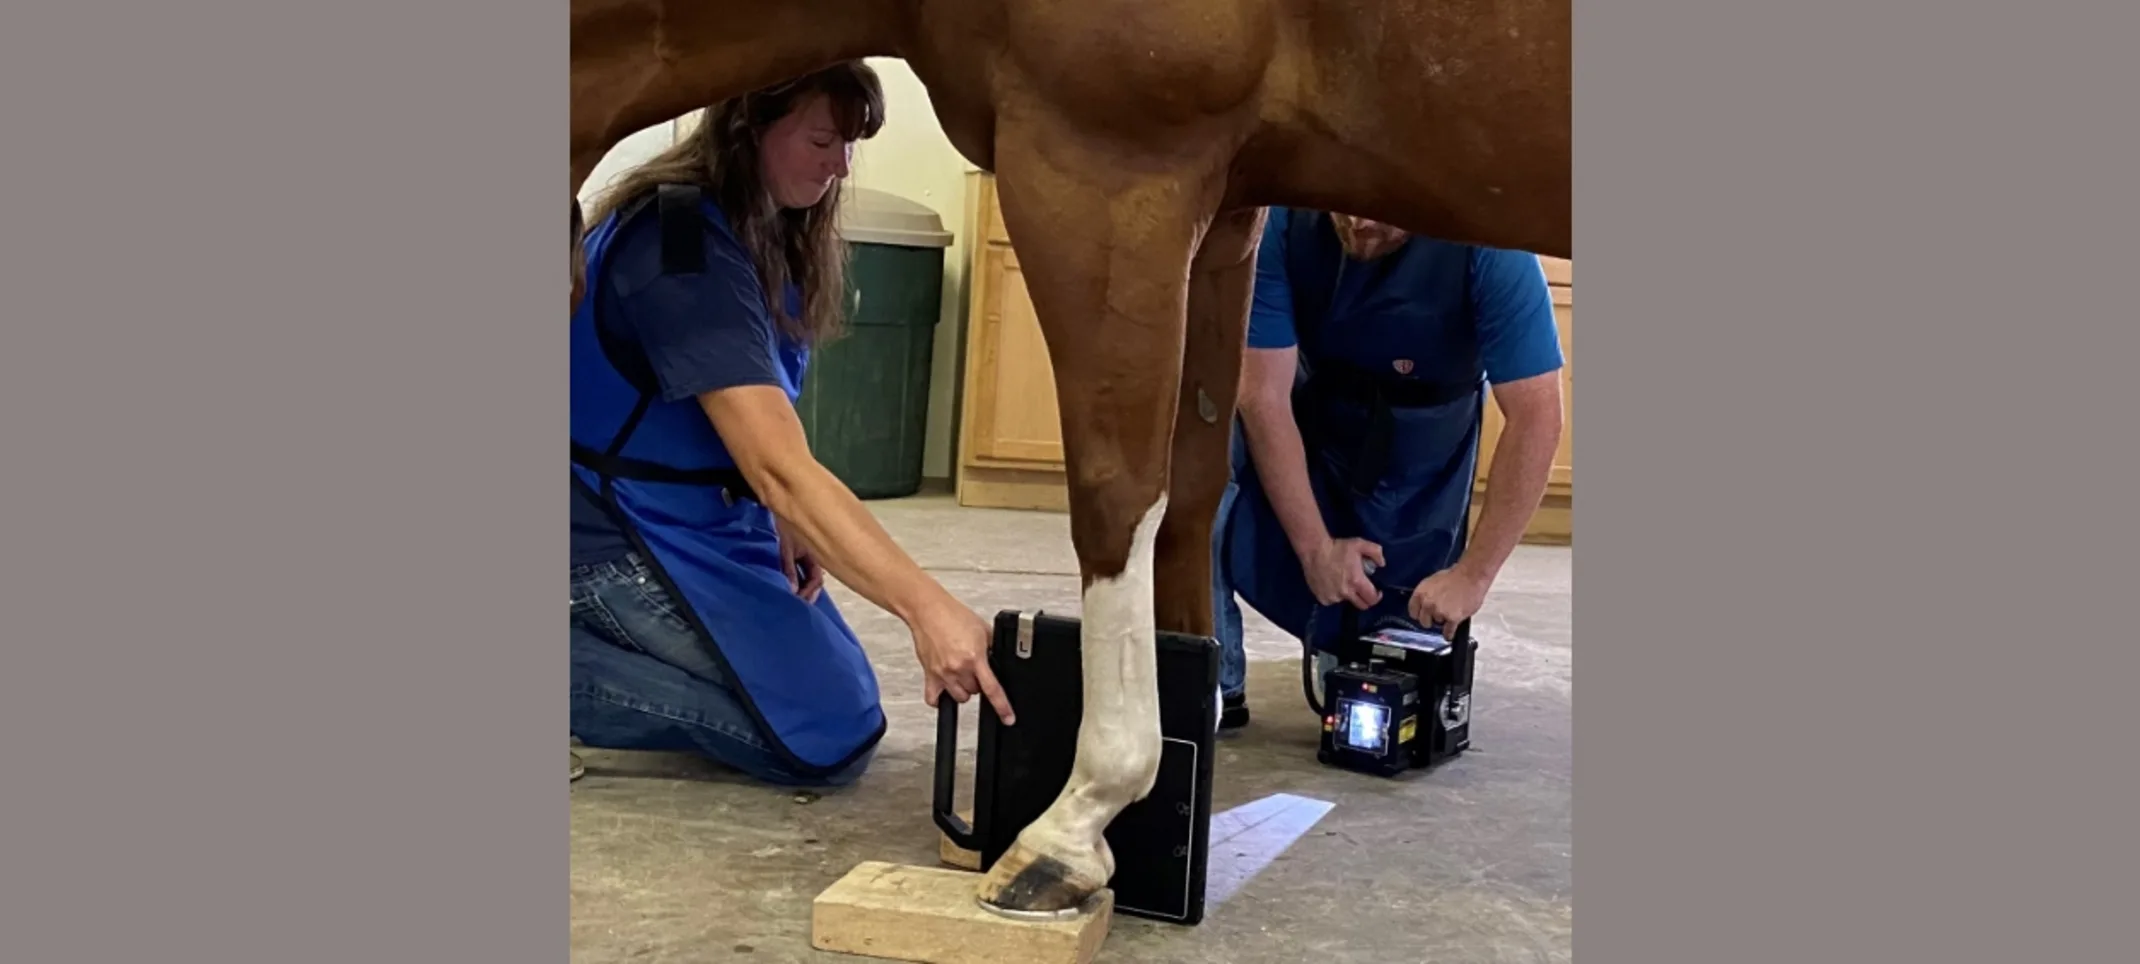 Veterinarians conducting an xray on a horse